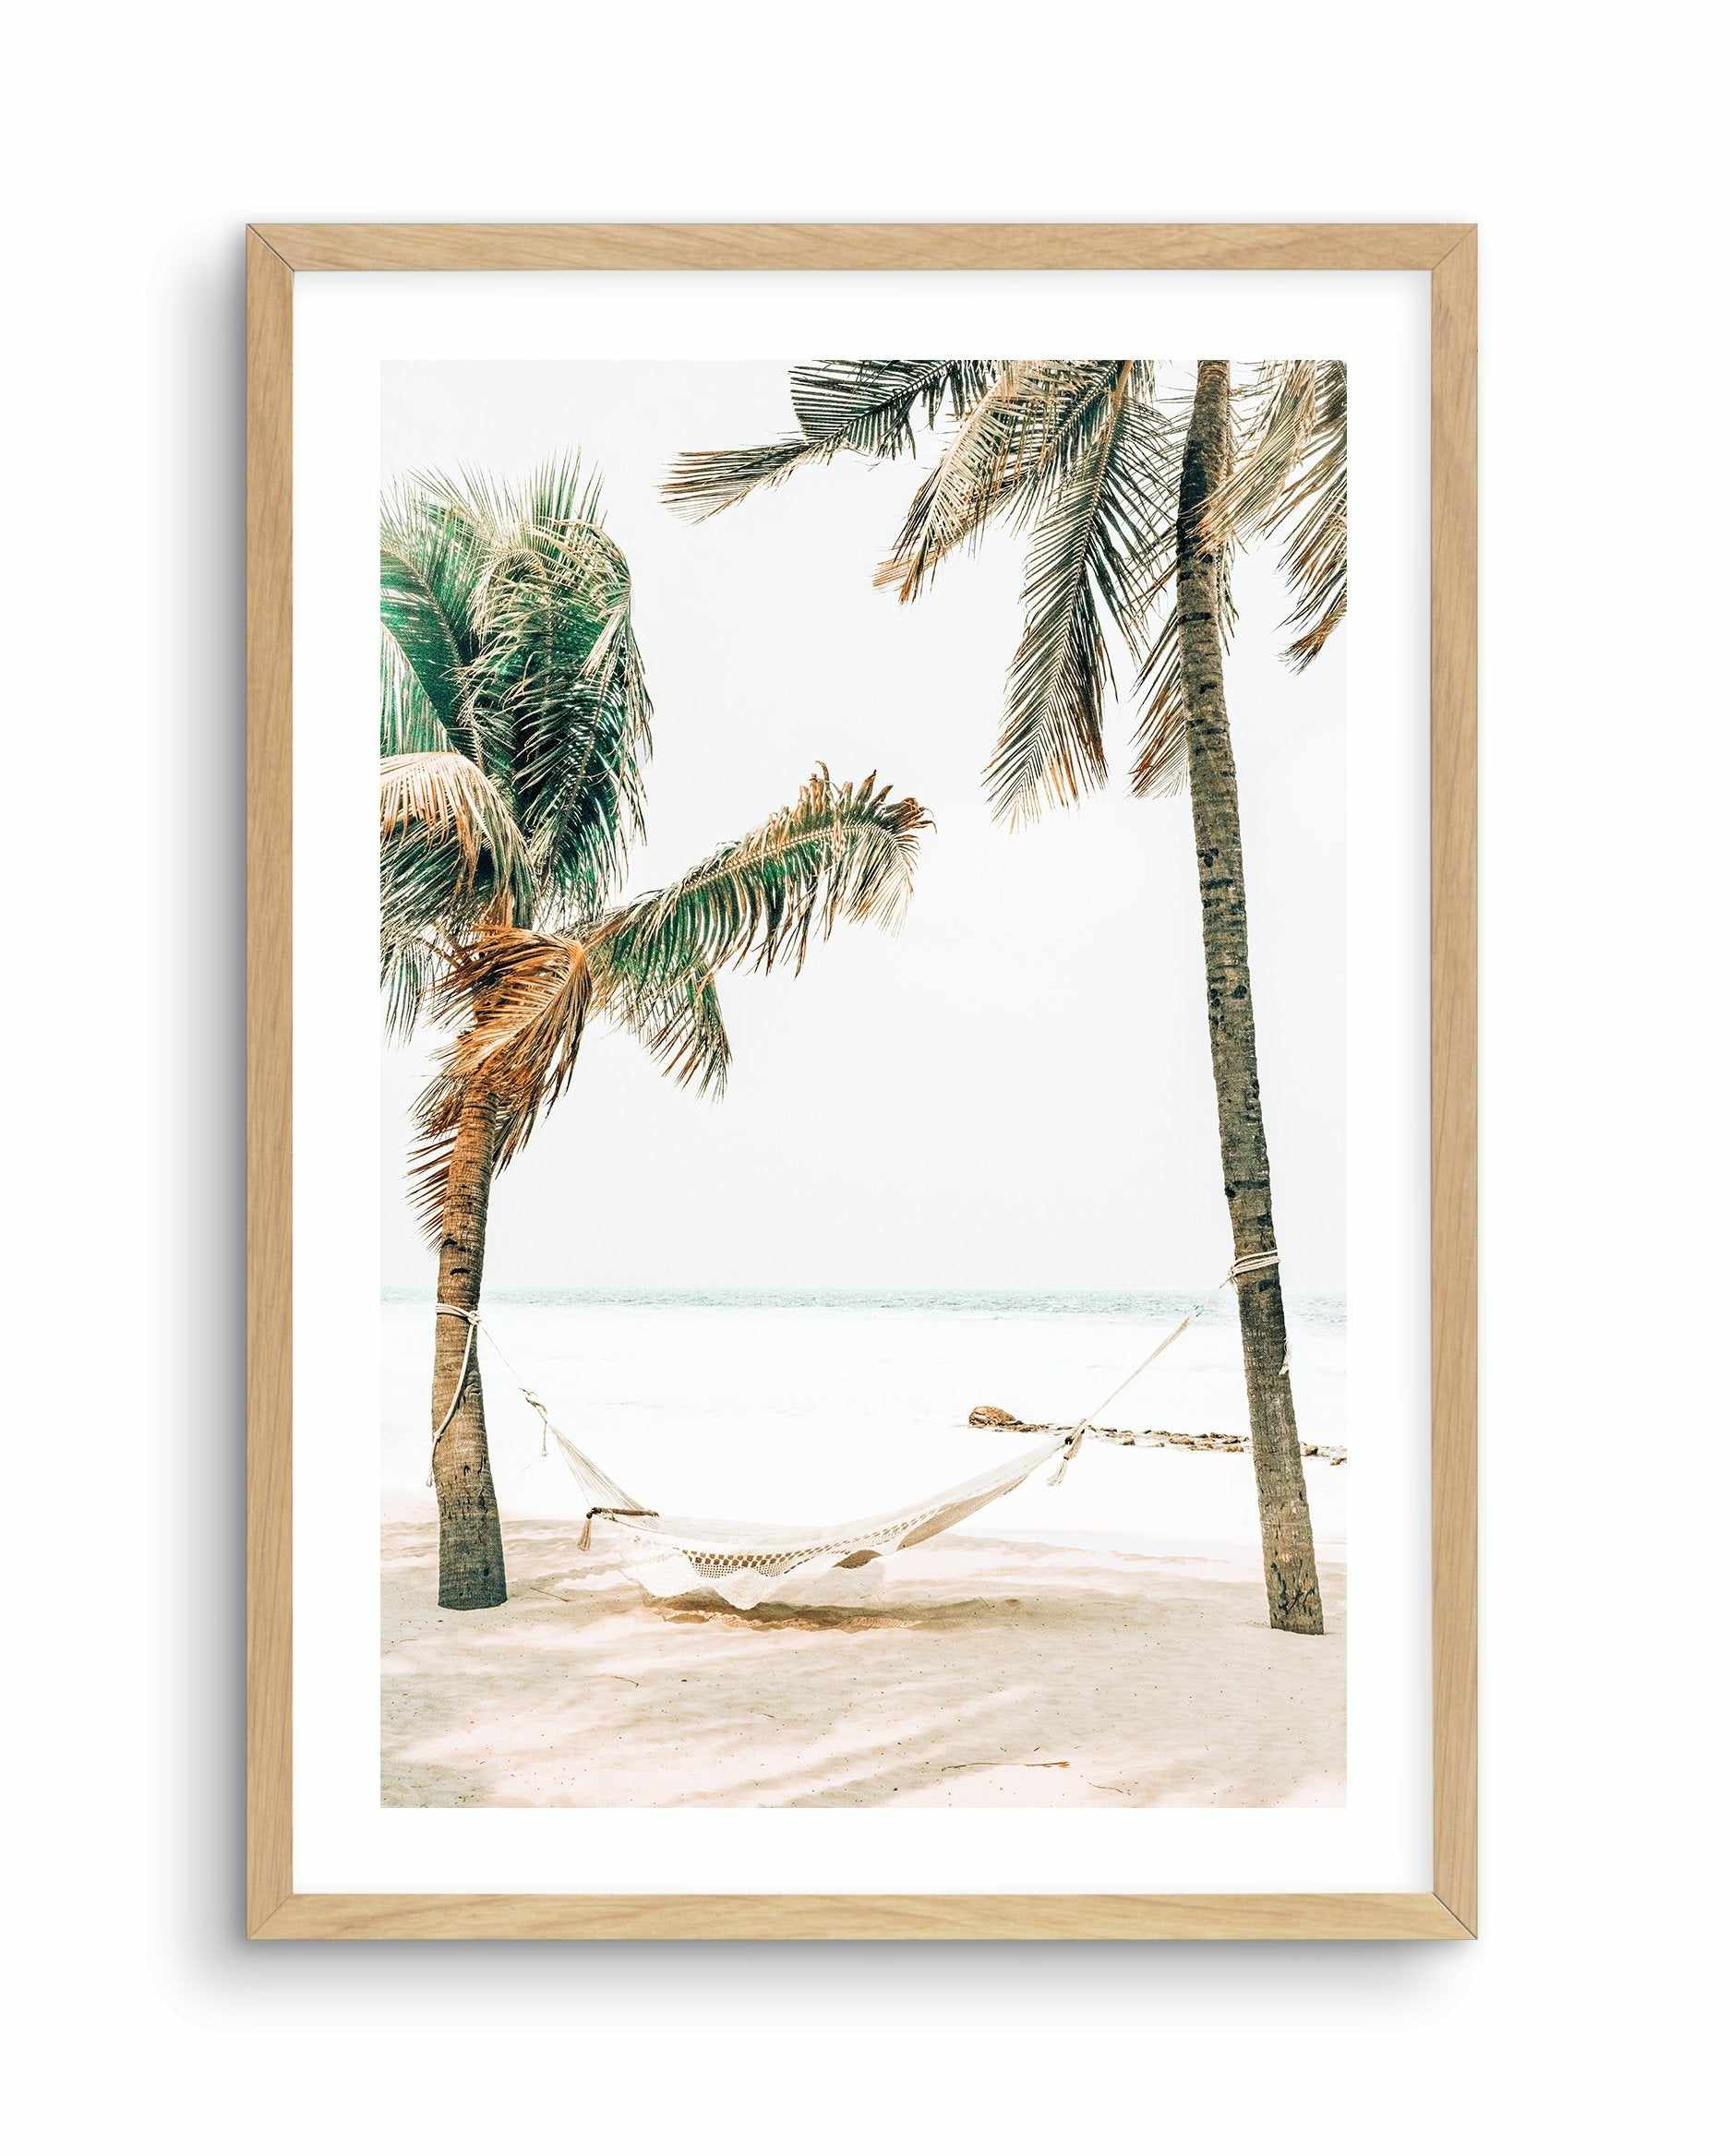 SHOP Midday in the Maldives | Palm Tree Hammock Art Print or Poster ...